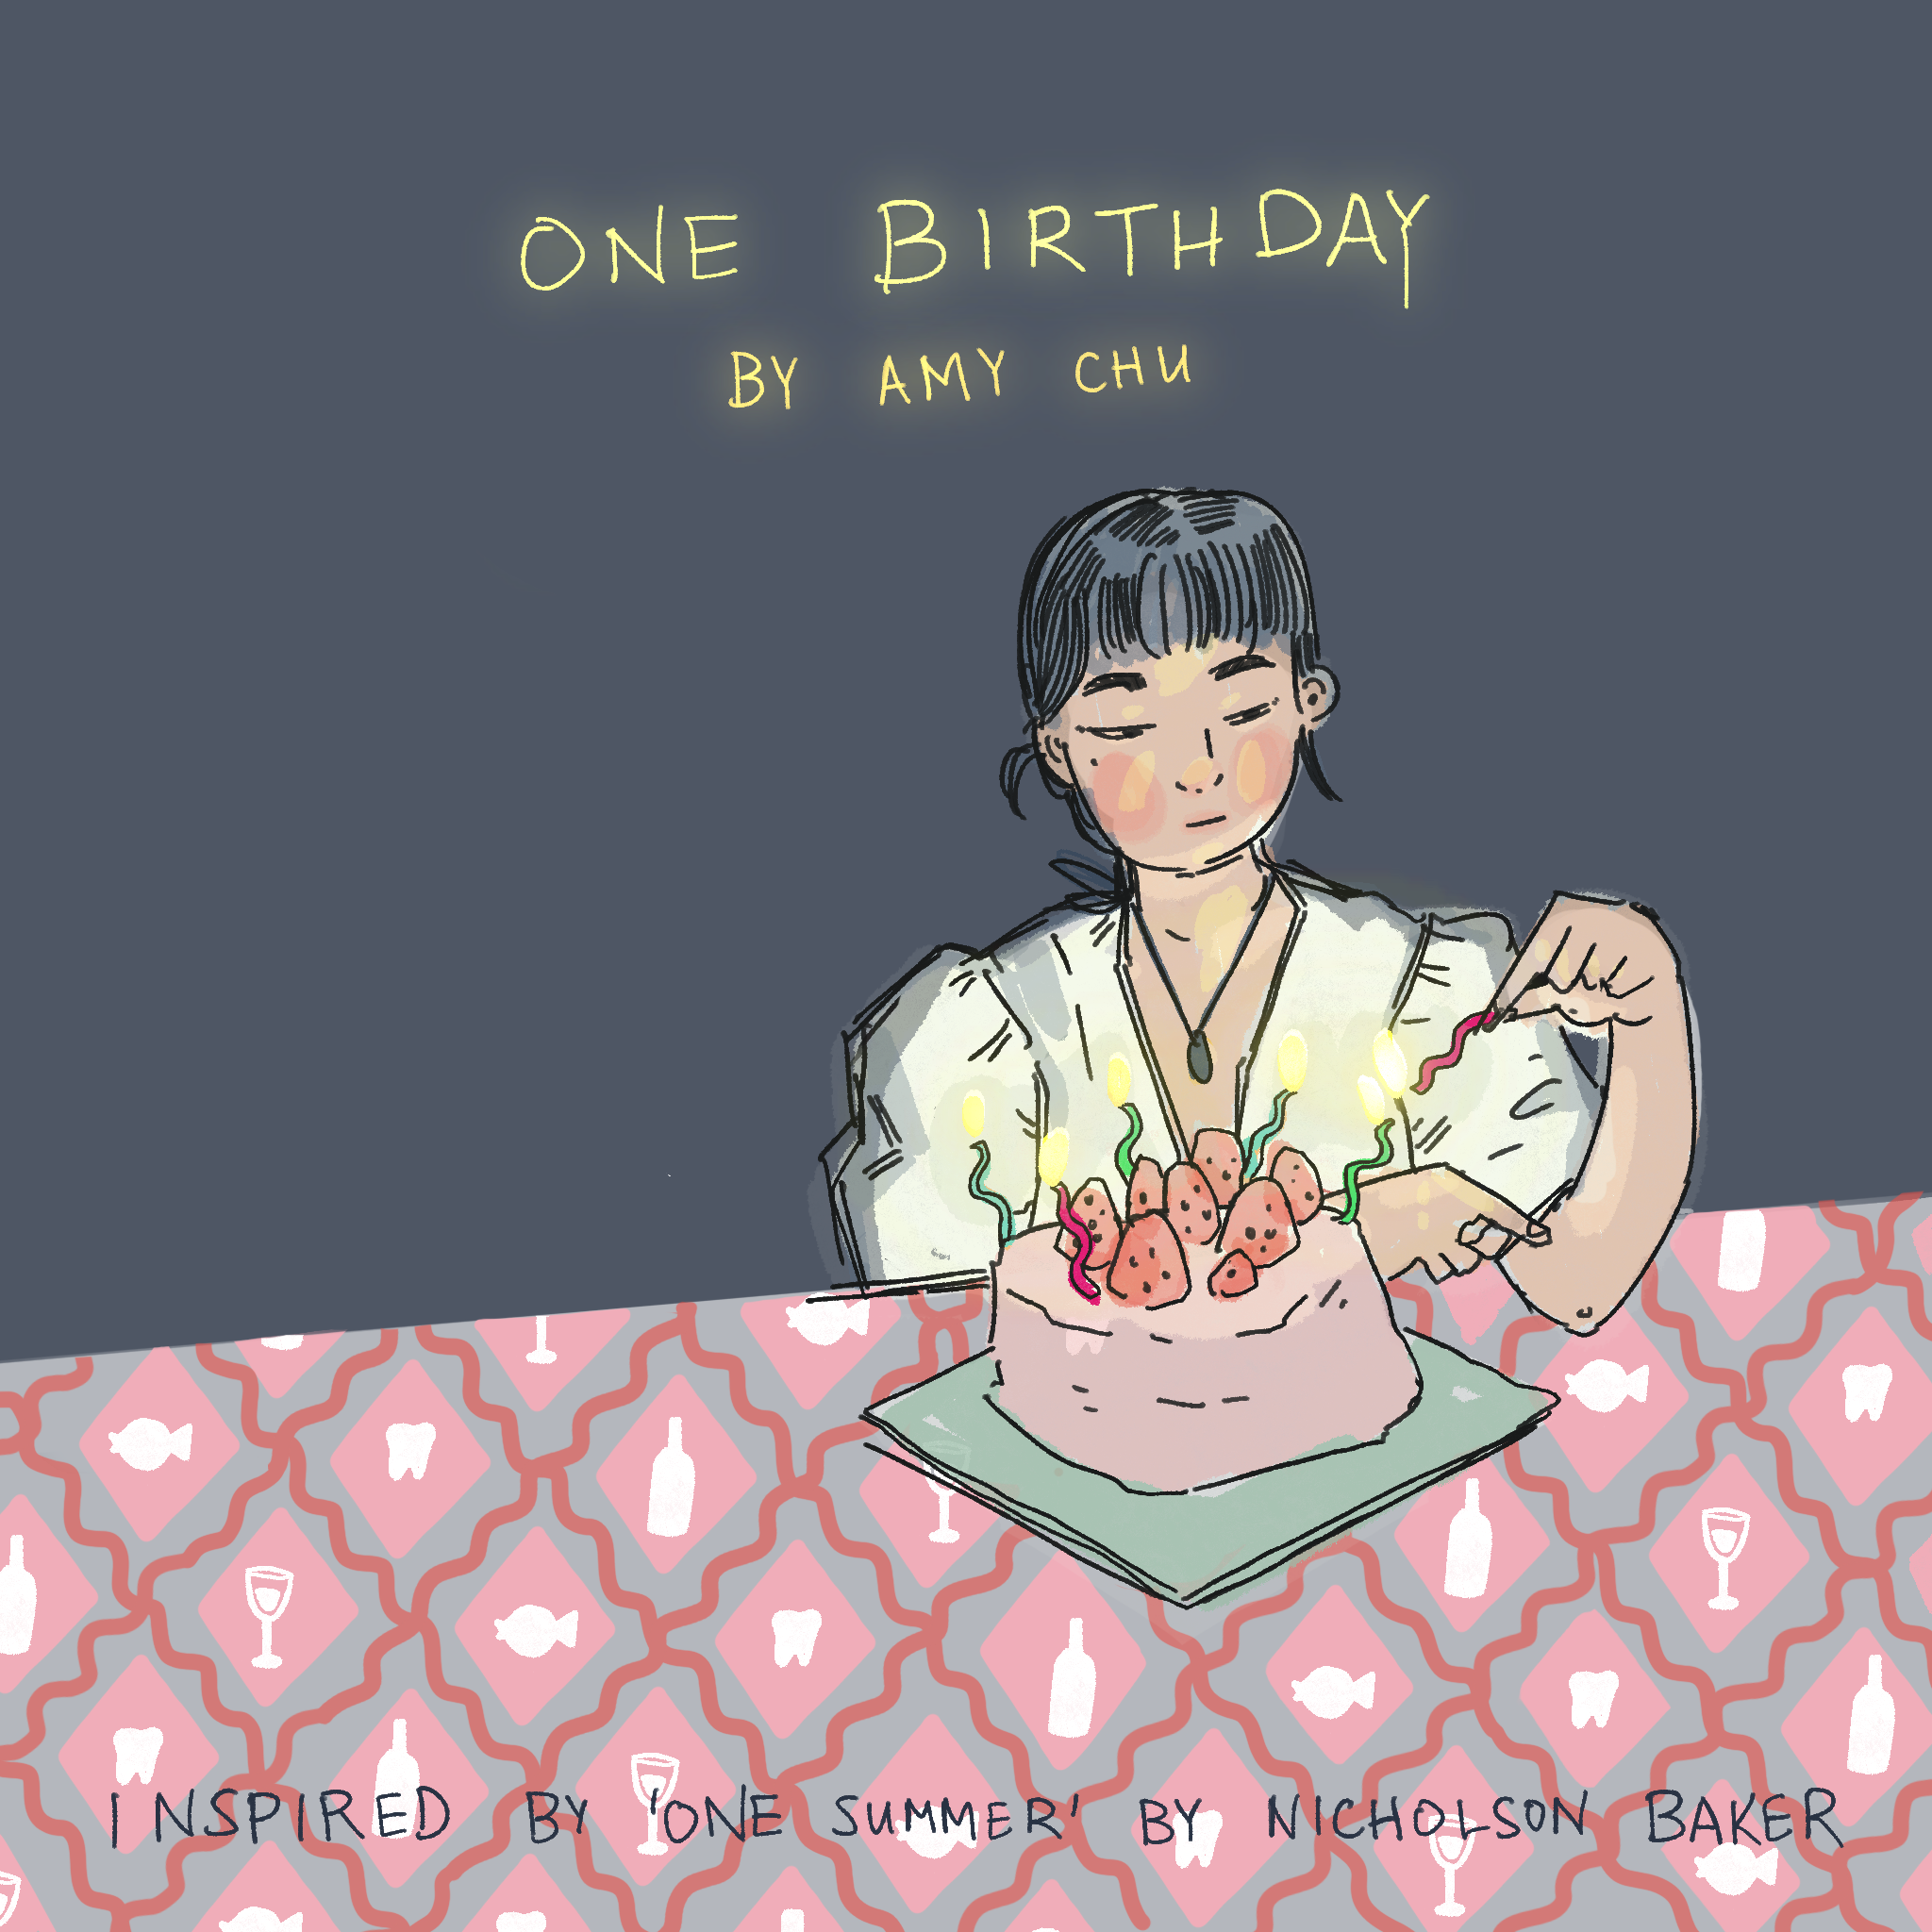 illustration: a young woman sits with a birthday cake topped with strawberries and lit swiggle-shaped candles. Text reads One Birthday by Amy Chu, inspired by 'one summer' by Nicholson Baker